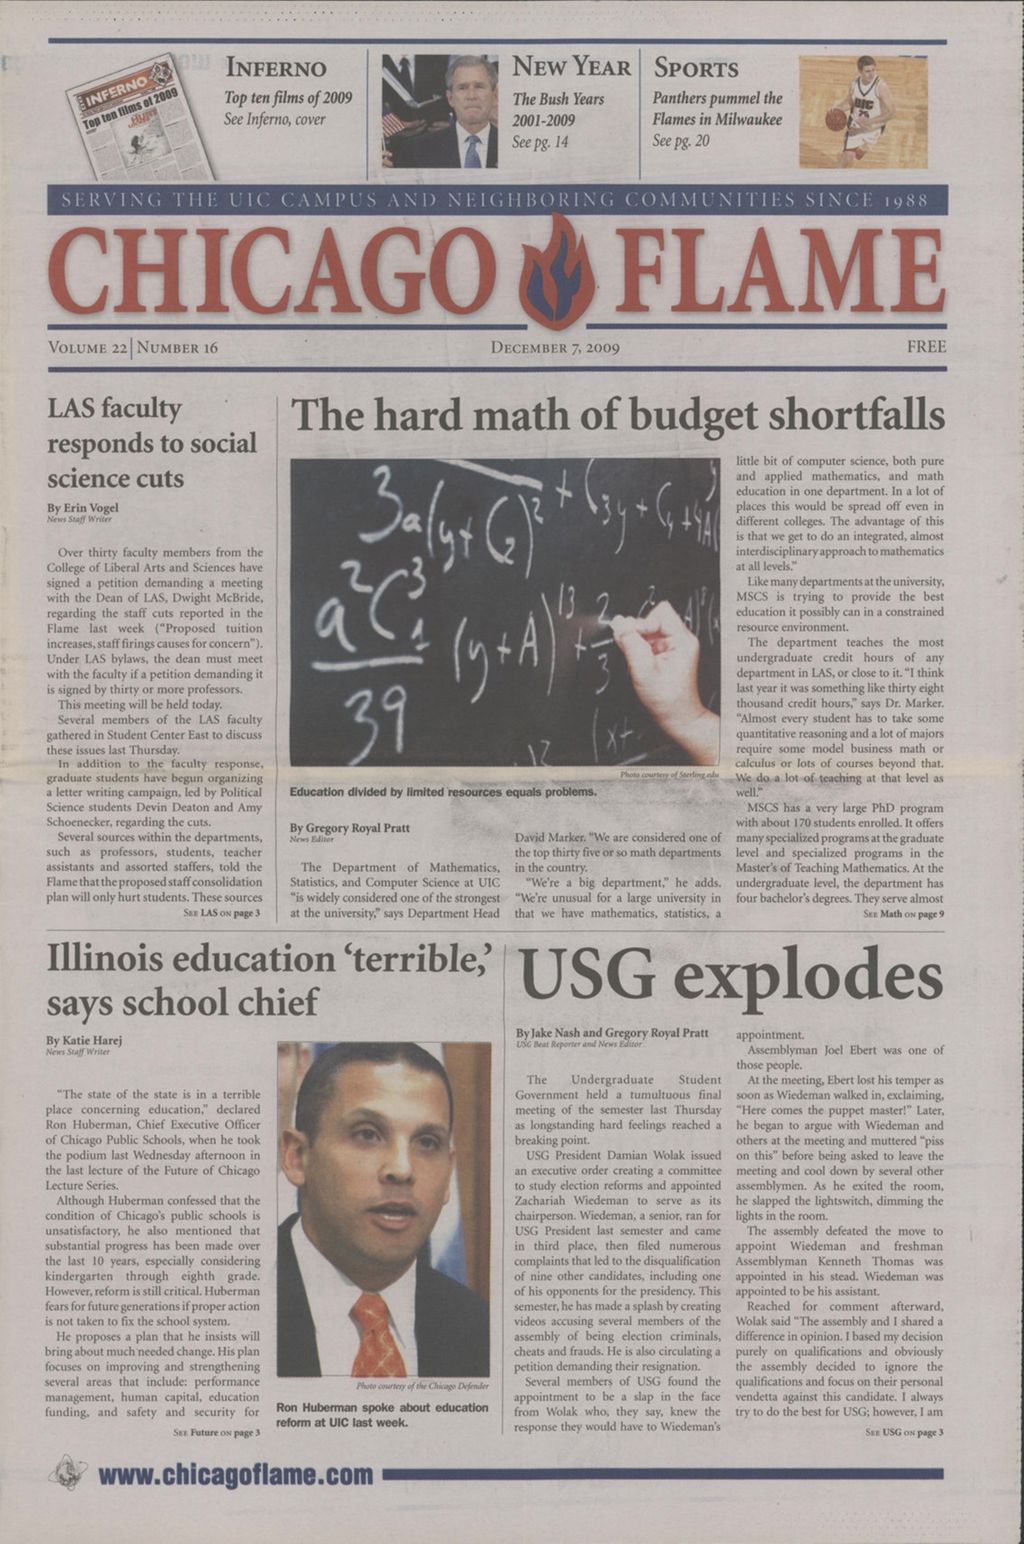 Miniature of Chicago Flame (December 7, 2009)